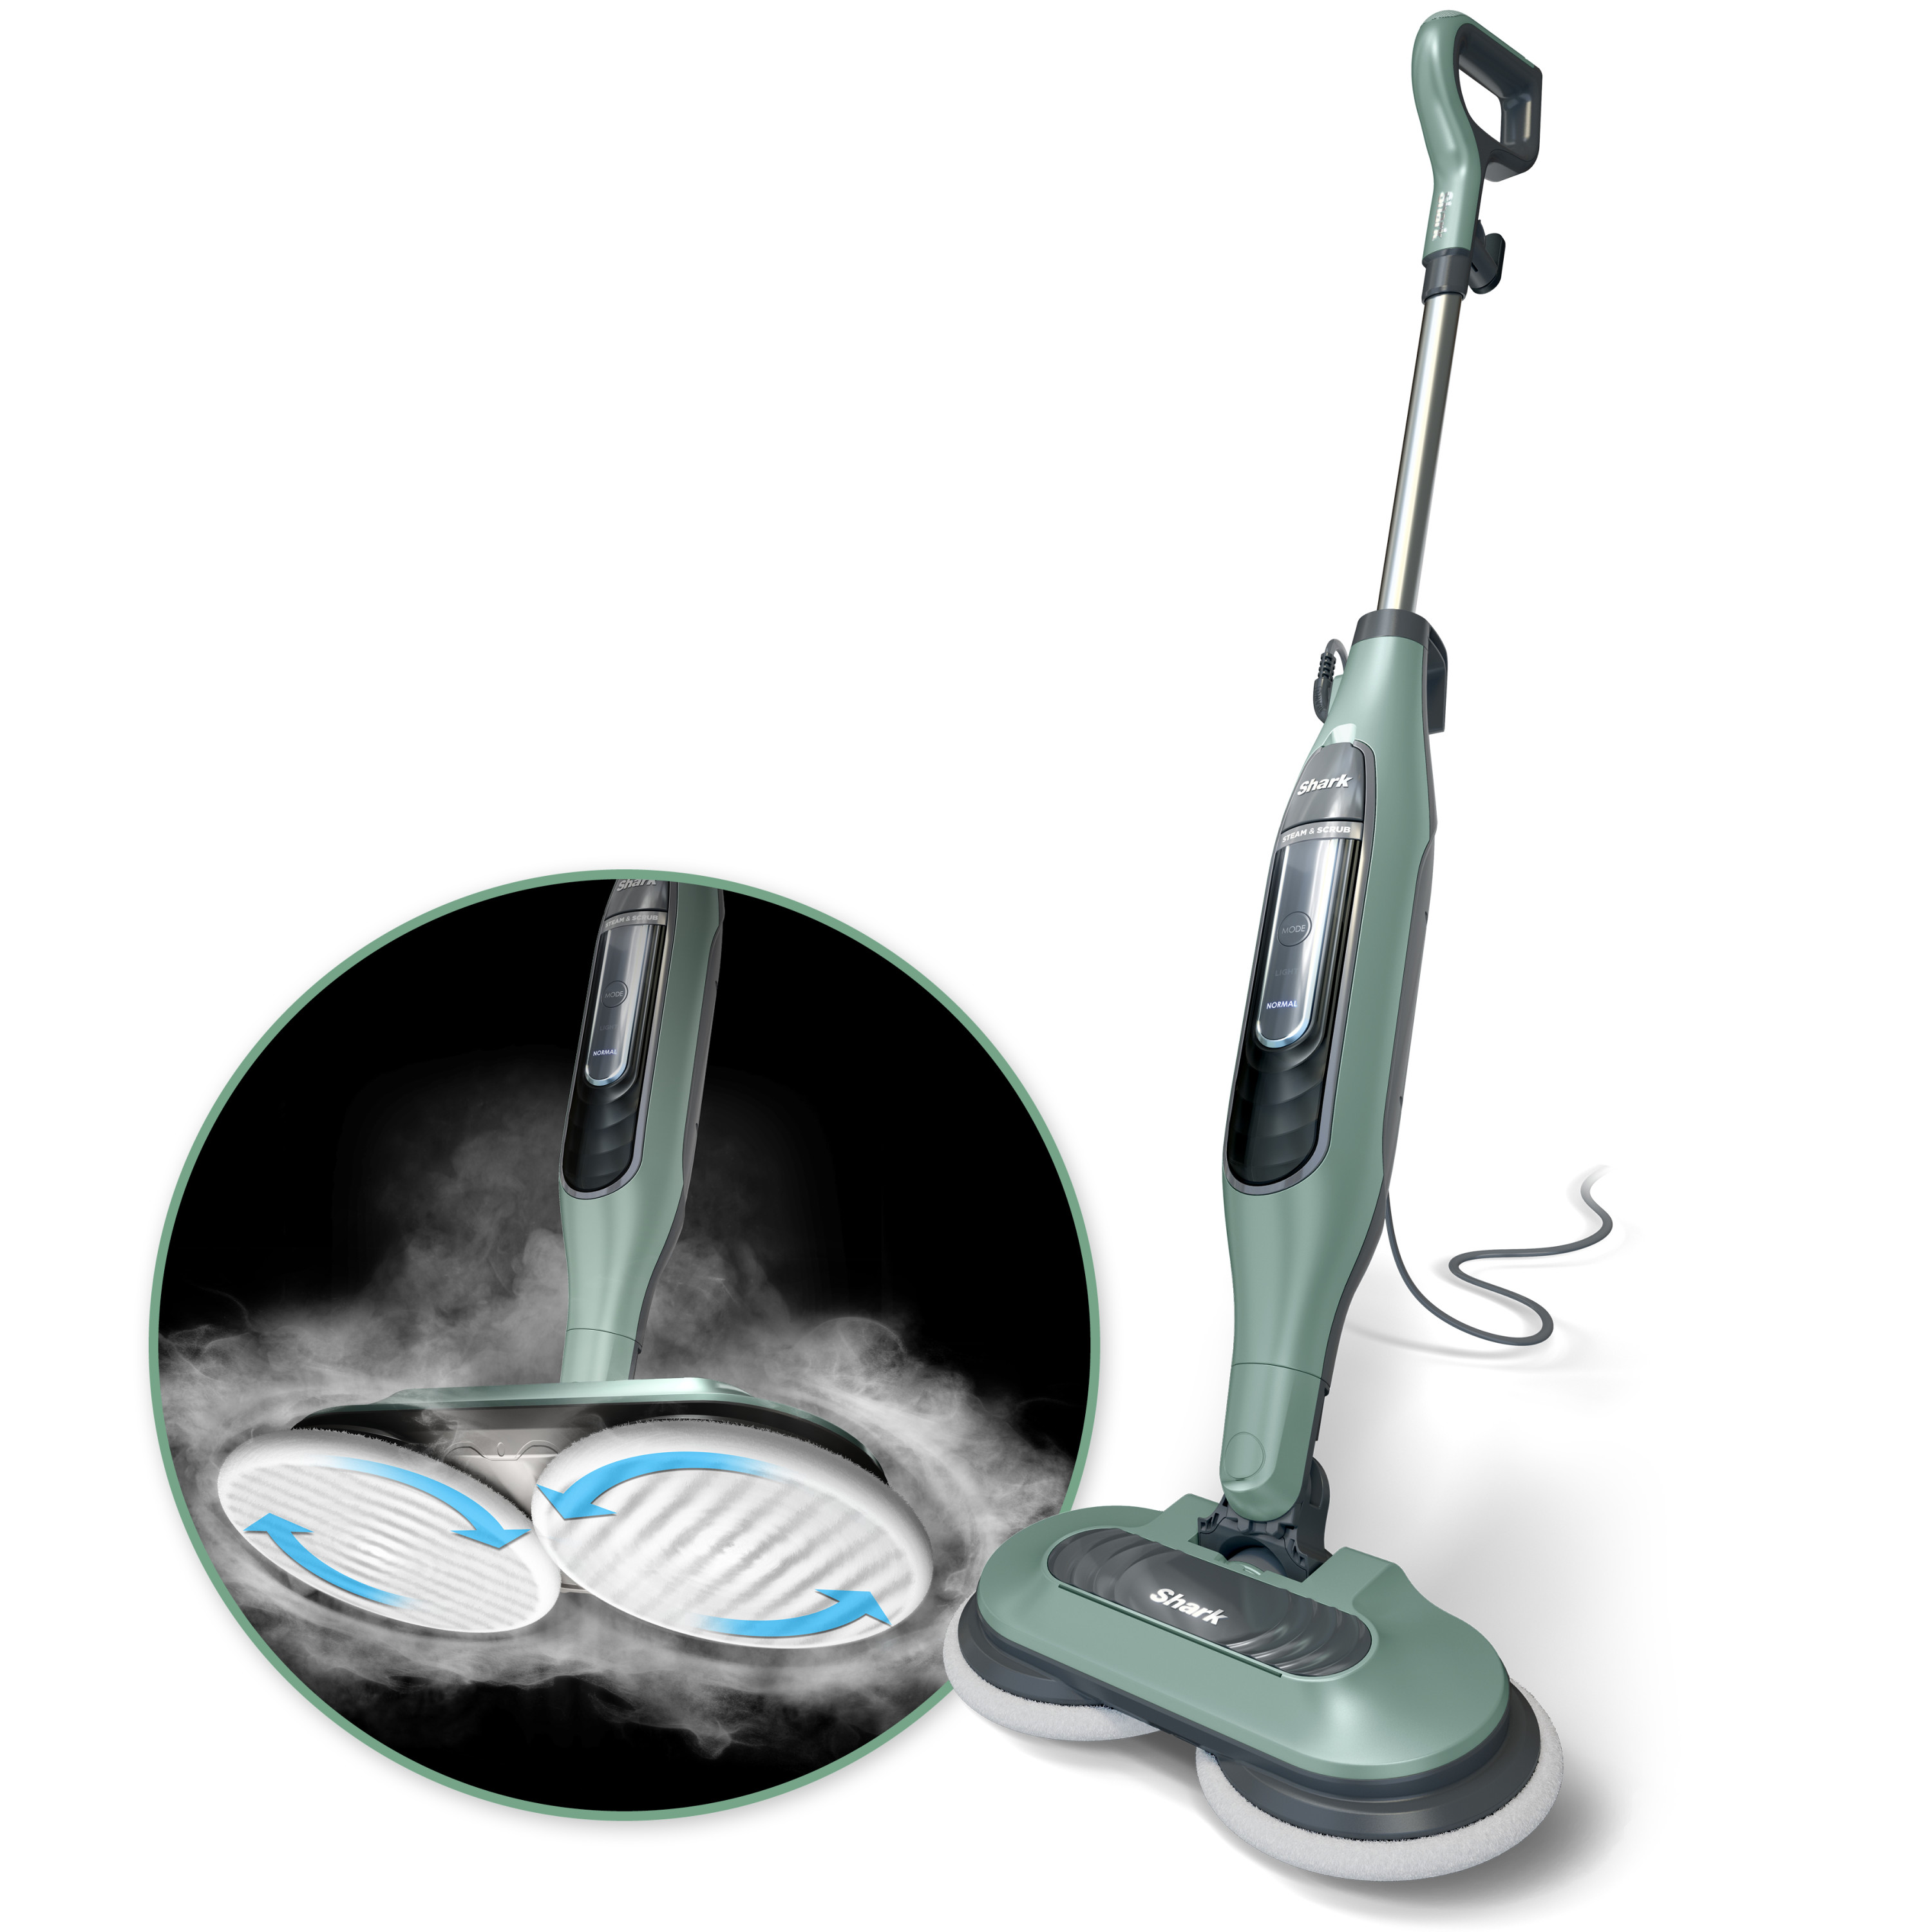 Shark® Steam & Scrub All-in-One Scrubbing and Sanitizing Hard Floor Steam Mop S7000 - image 1 of 14